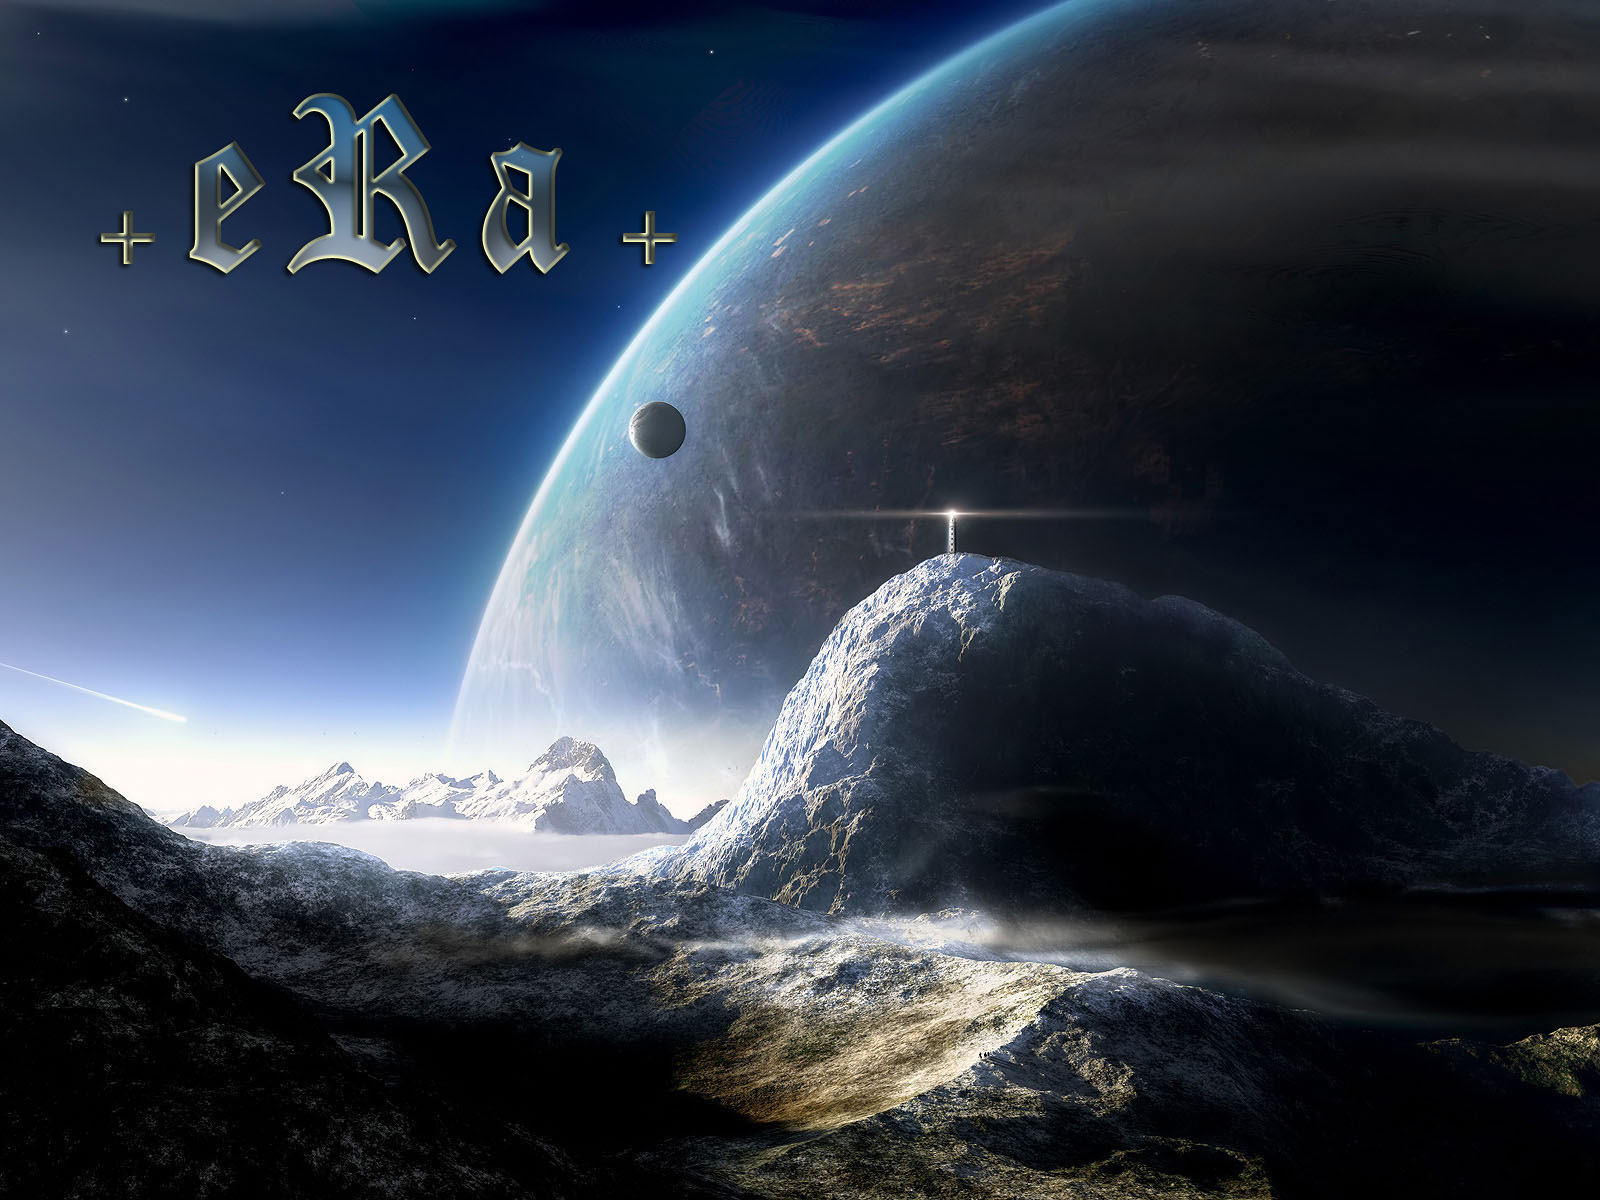 Era 2 New Age music project by French composer Eric Levi Free